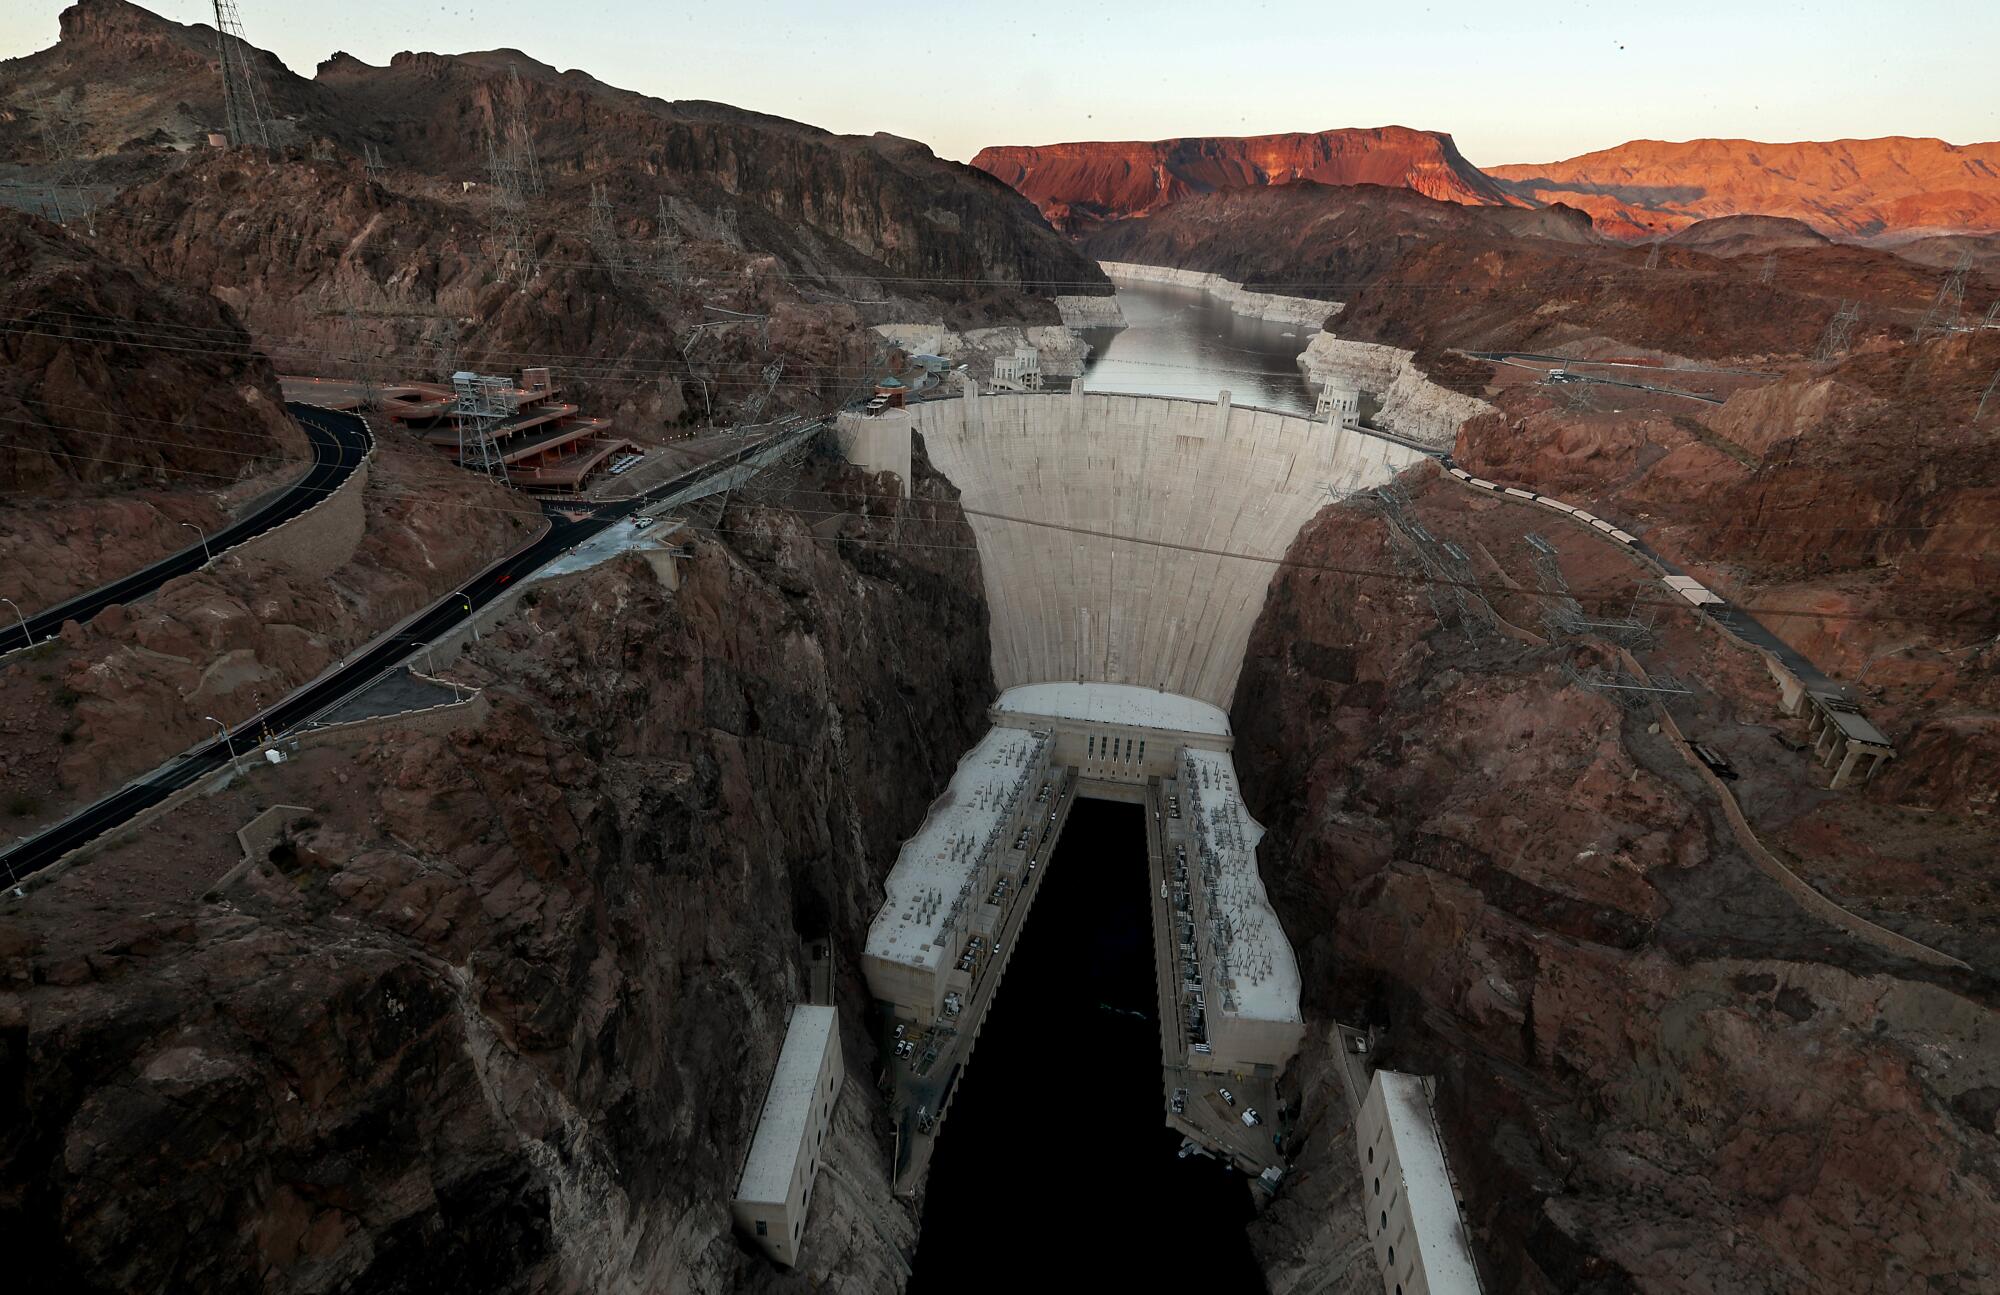 The Hoover Dam stands in front of Lake Mead, where white surfaces on the lake's rocky edges show how low water levels are.